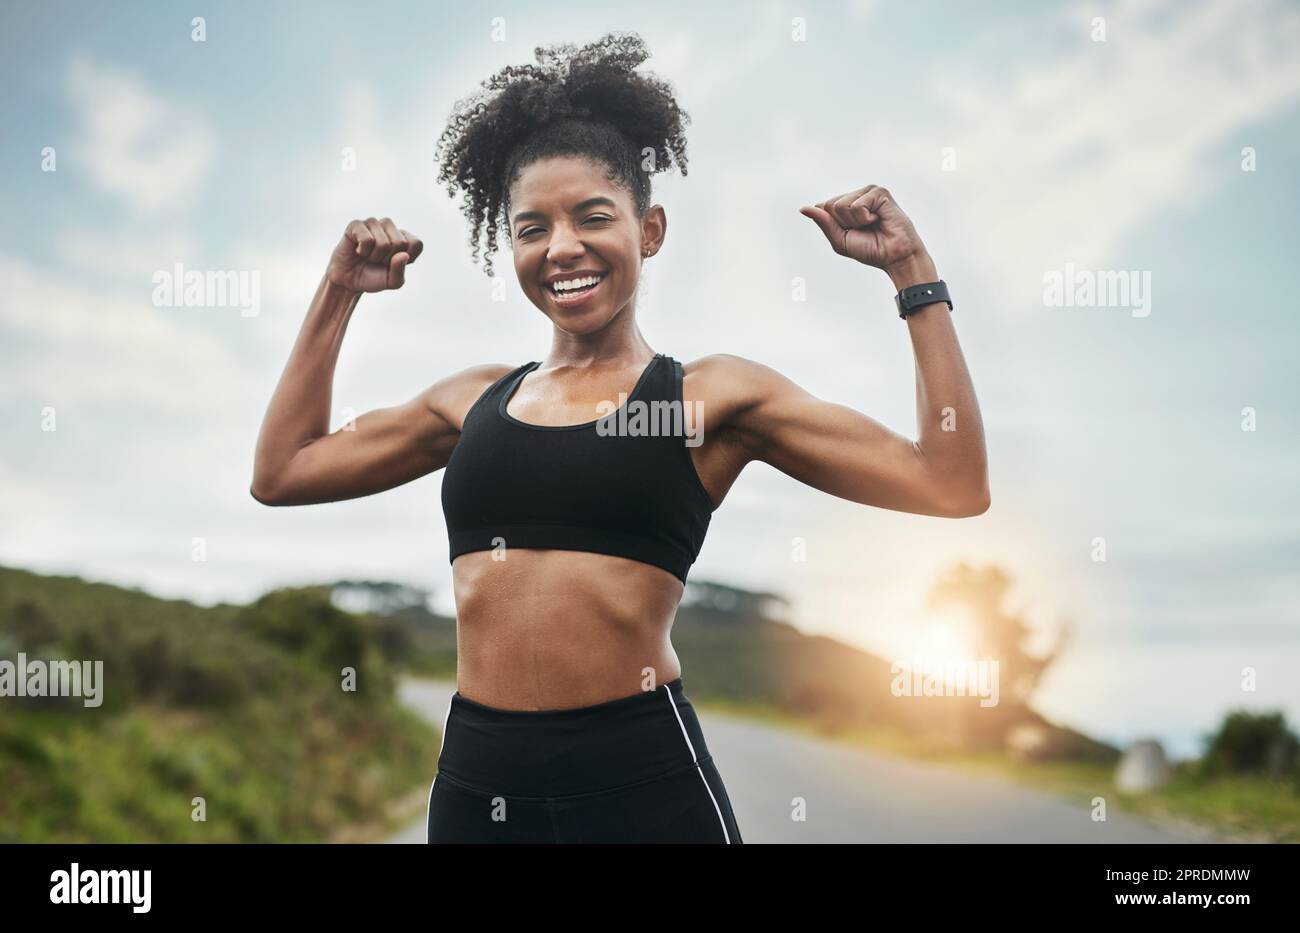 Welcome to the gun show. Cropped portrait of an attractive young sportswoman flexing her biceps outside. Stock Photo